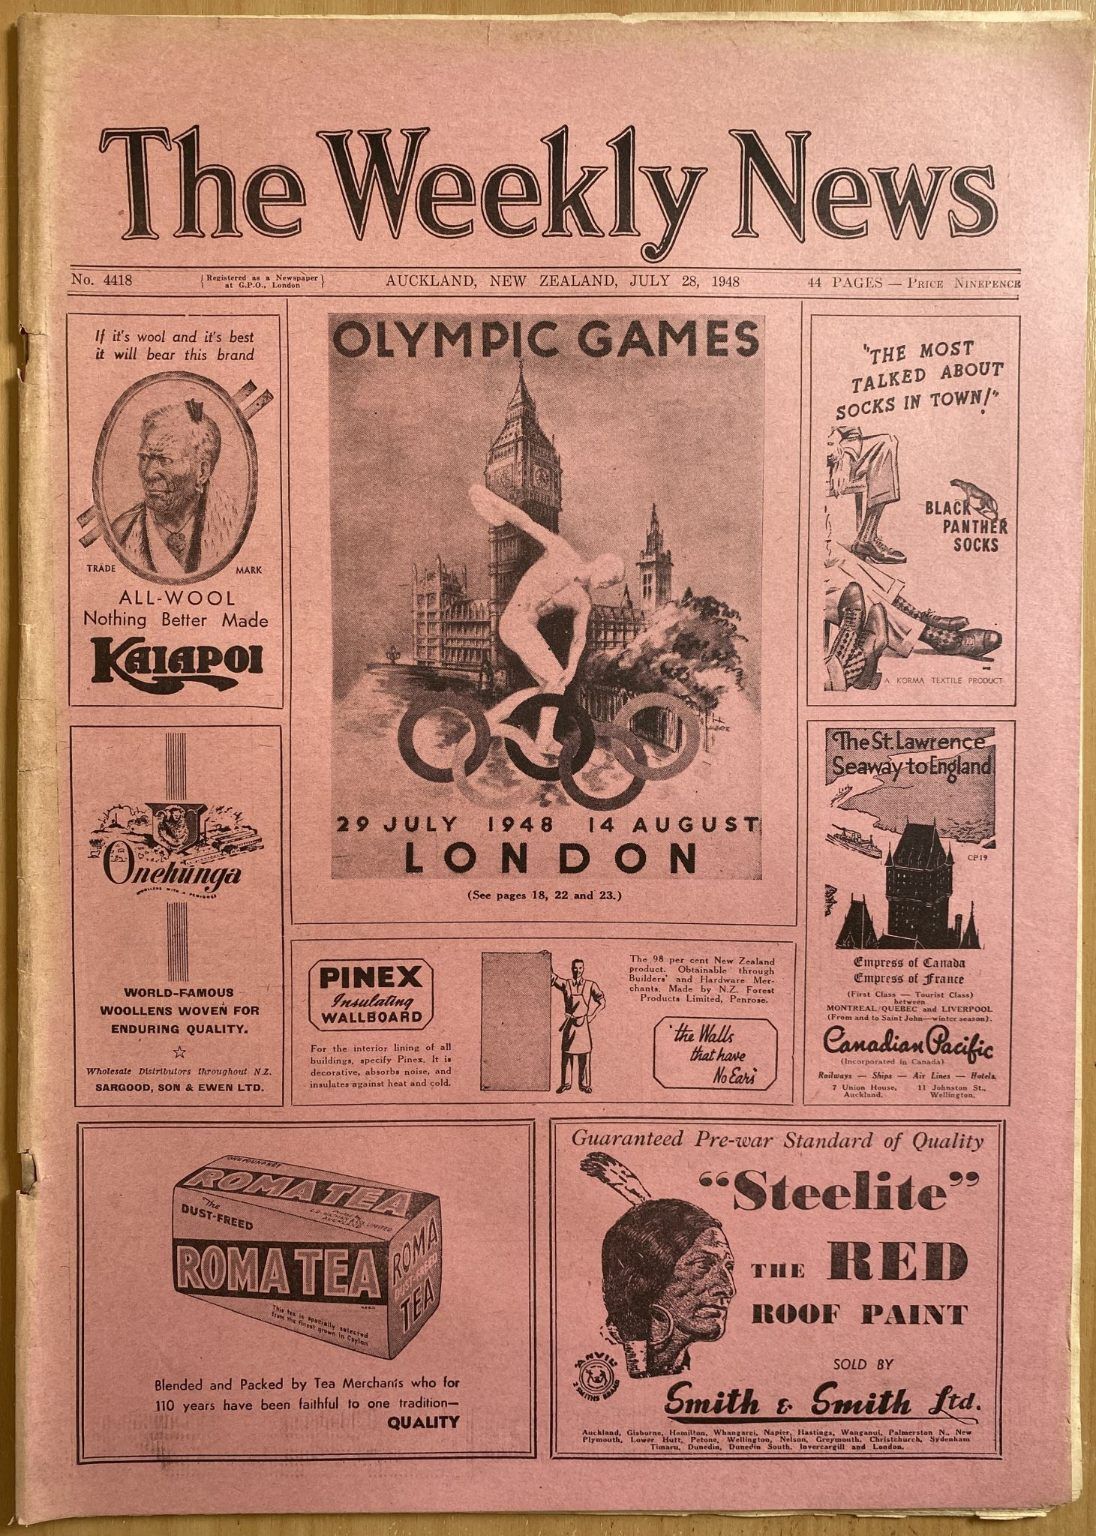 OLD NEWSPAPER: The Weekly News - No. 4418, 28 July 1948